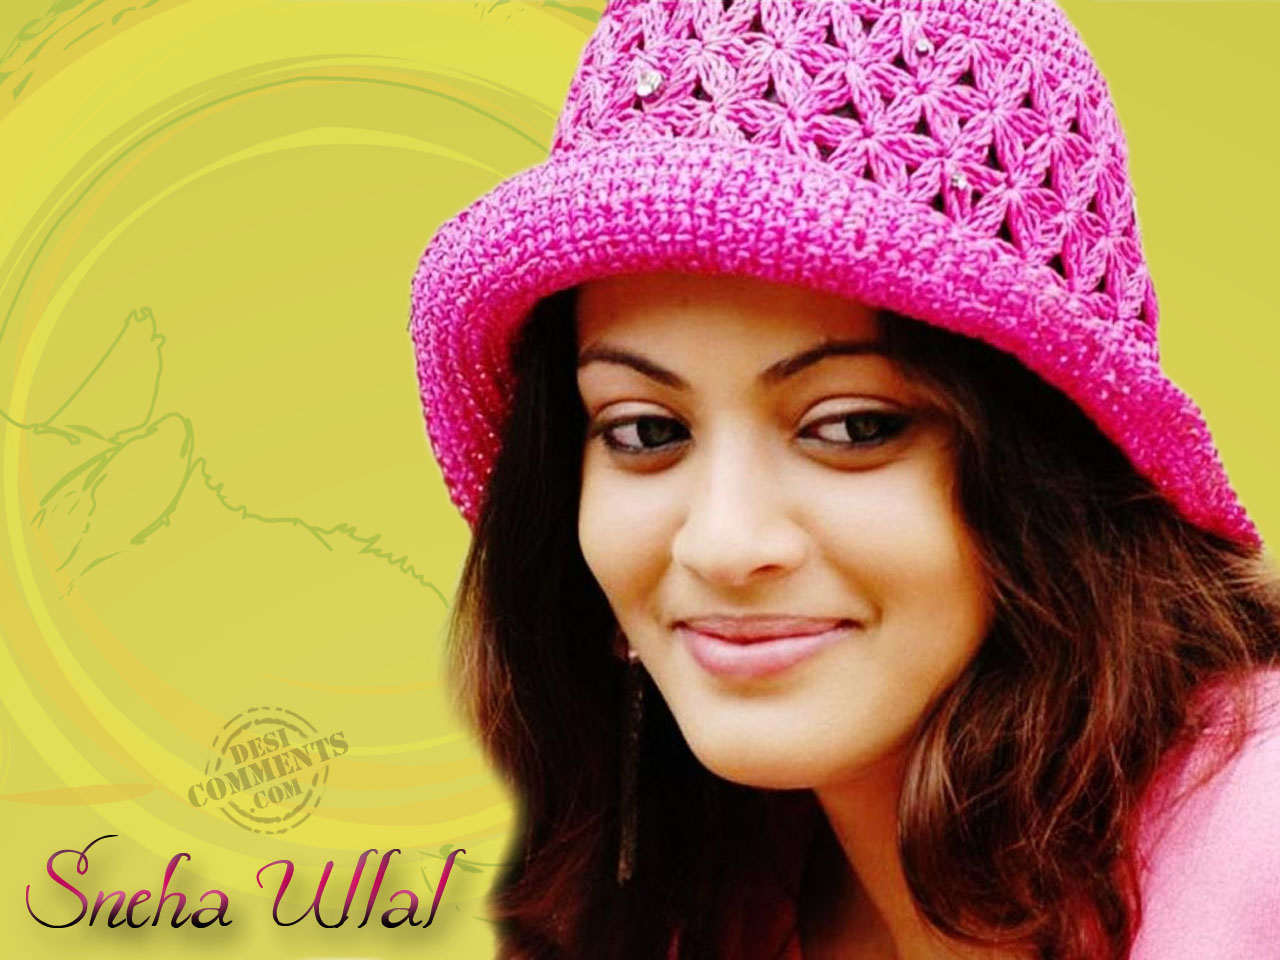 Sneha Ullal Hd Wallpaper - Sneha Ullal , HD Wallpaper & Backgrounds